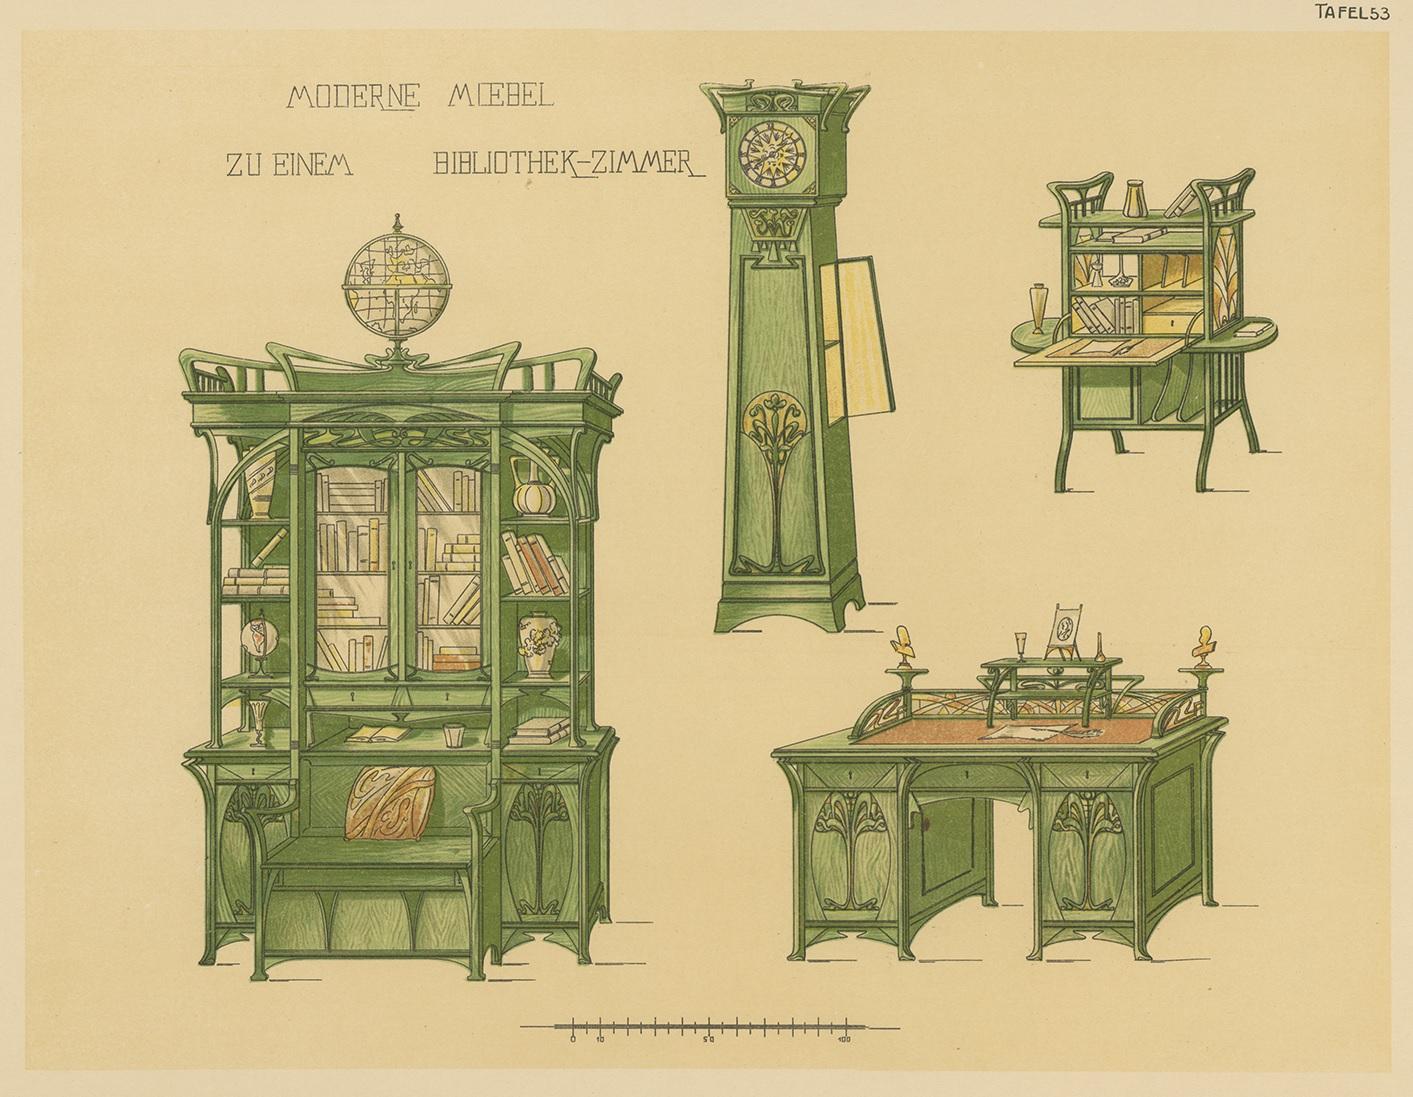 20th Century Pl 53 Antique Print of Library Furniture by Kramer, 'circa 1910' For Sale